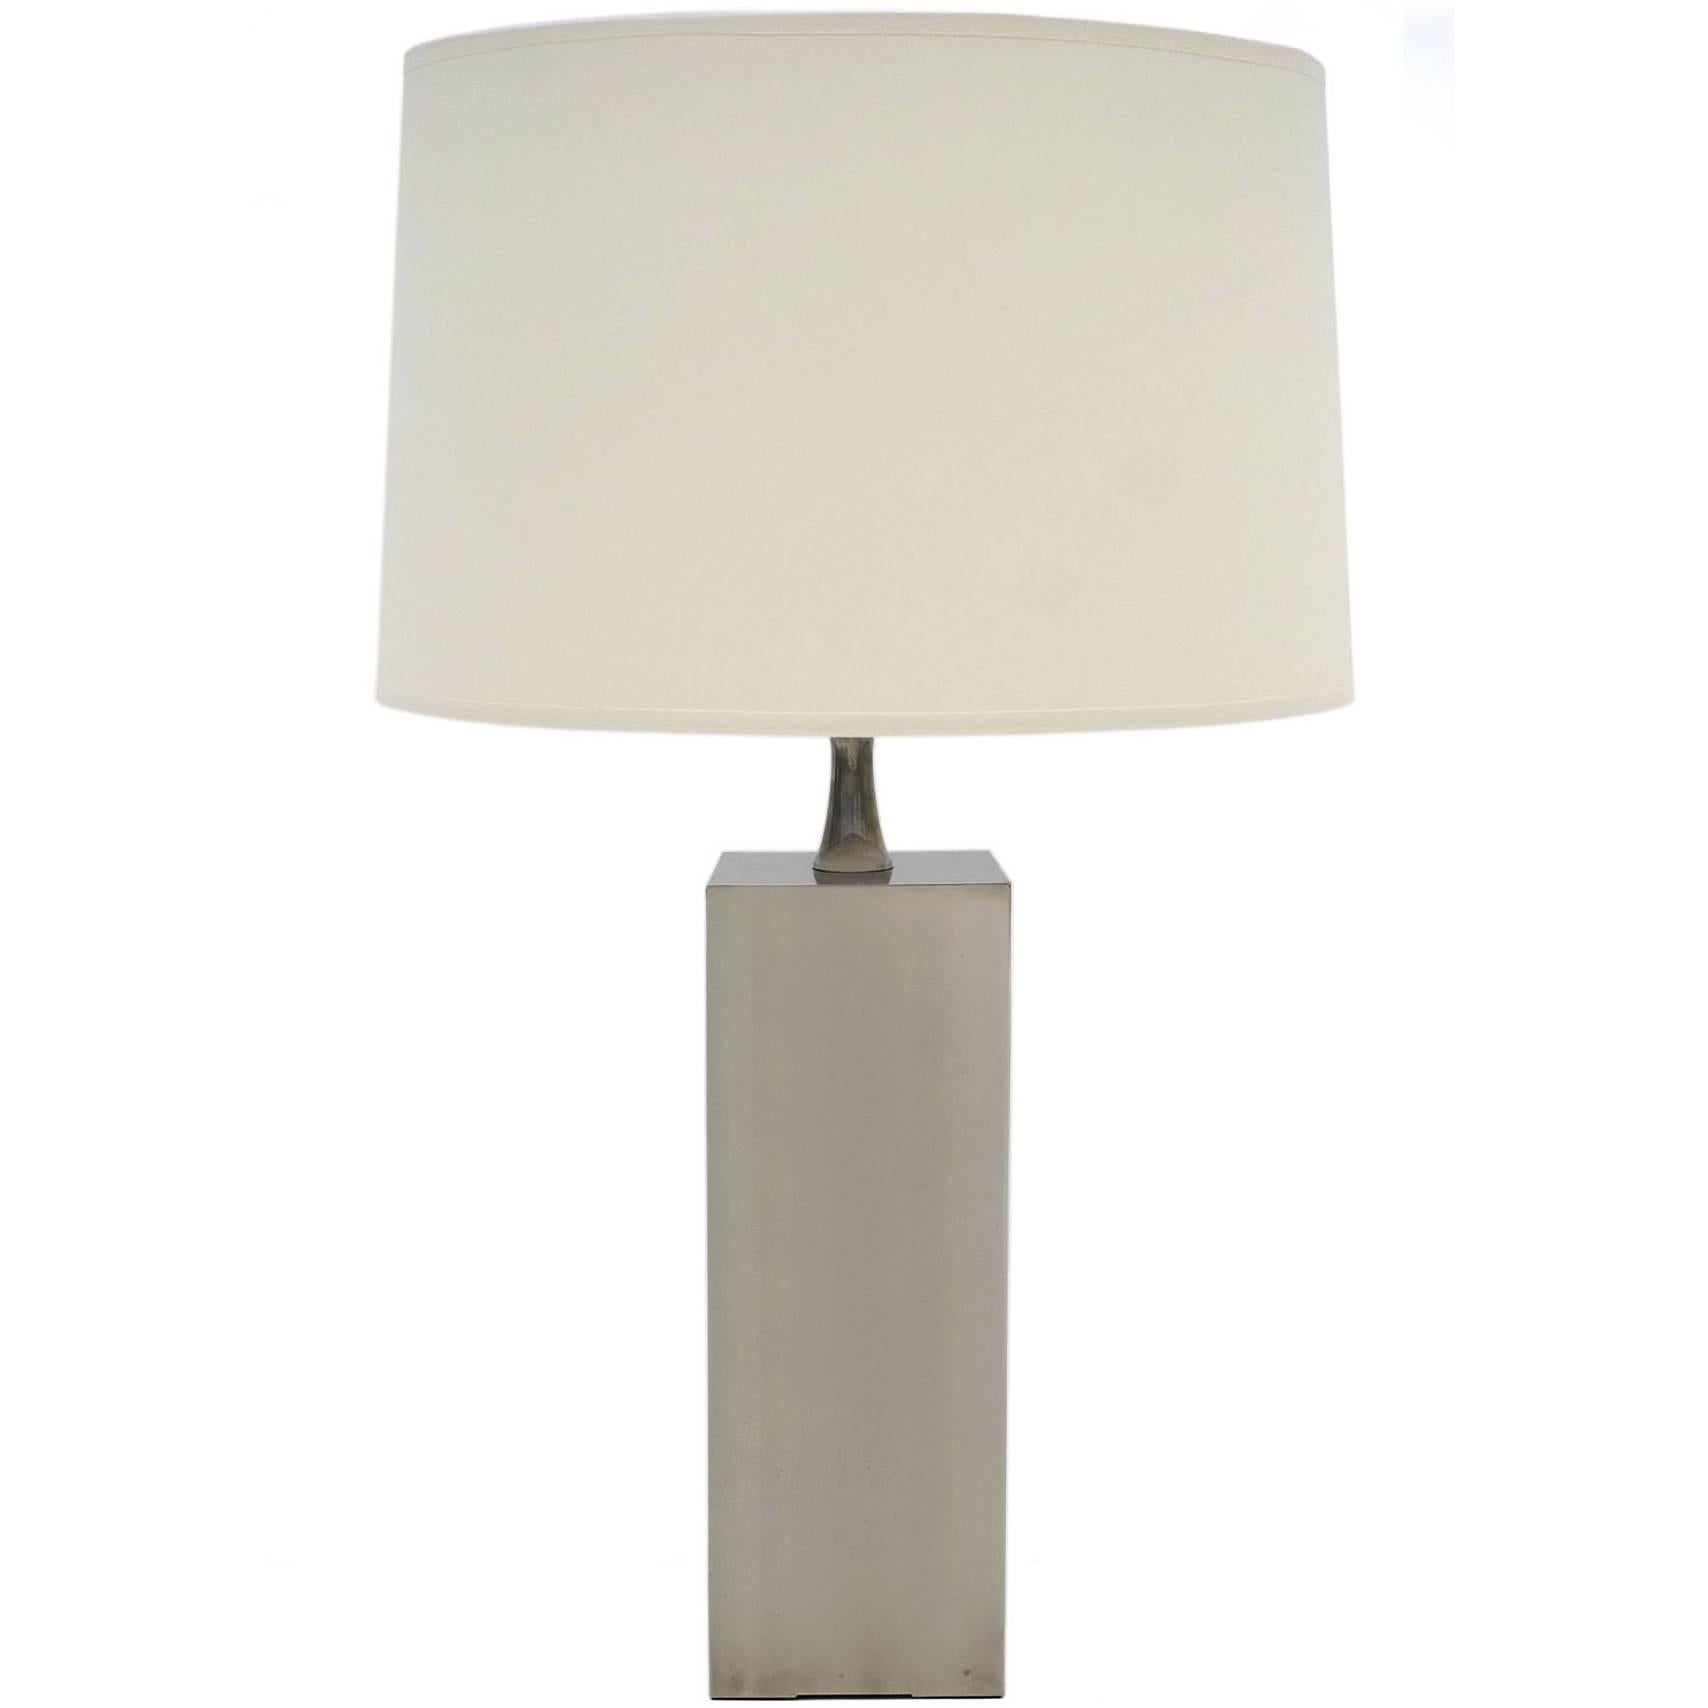 Midcentury Silver Metal Square Table Lamp by Maison Barbier, circa 1960s For Sale